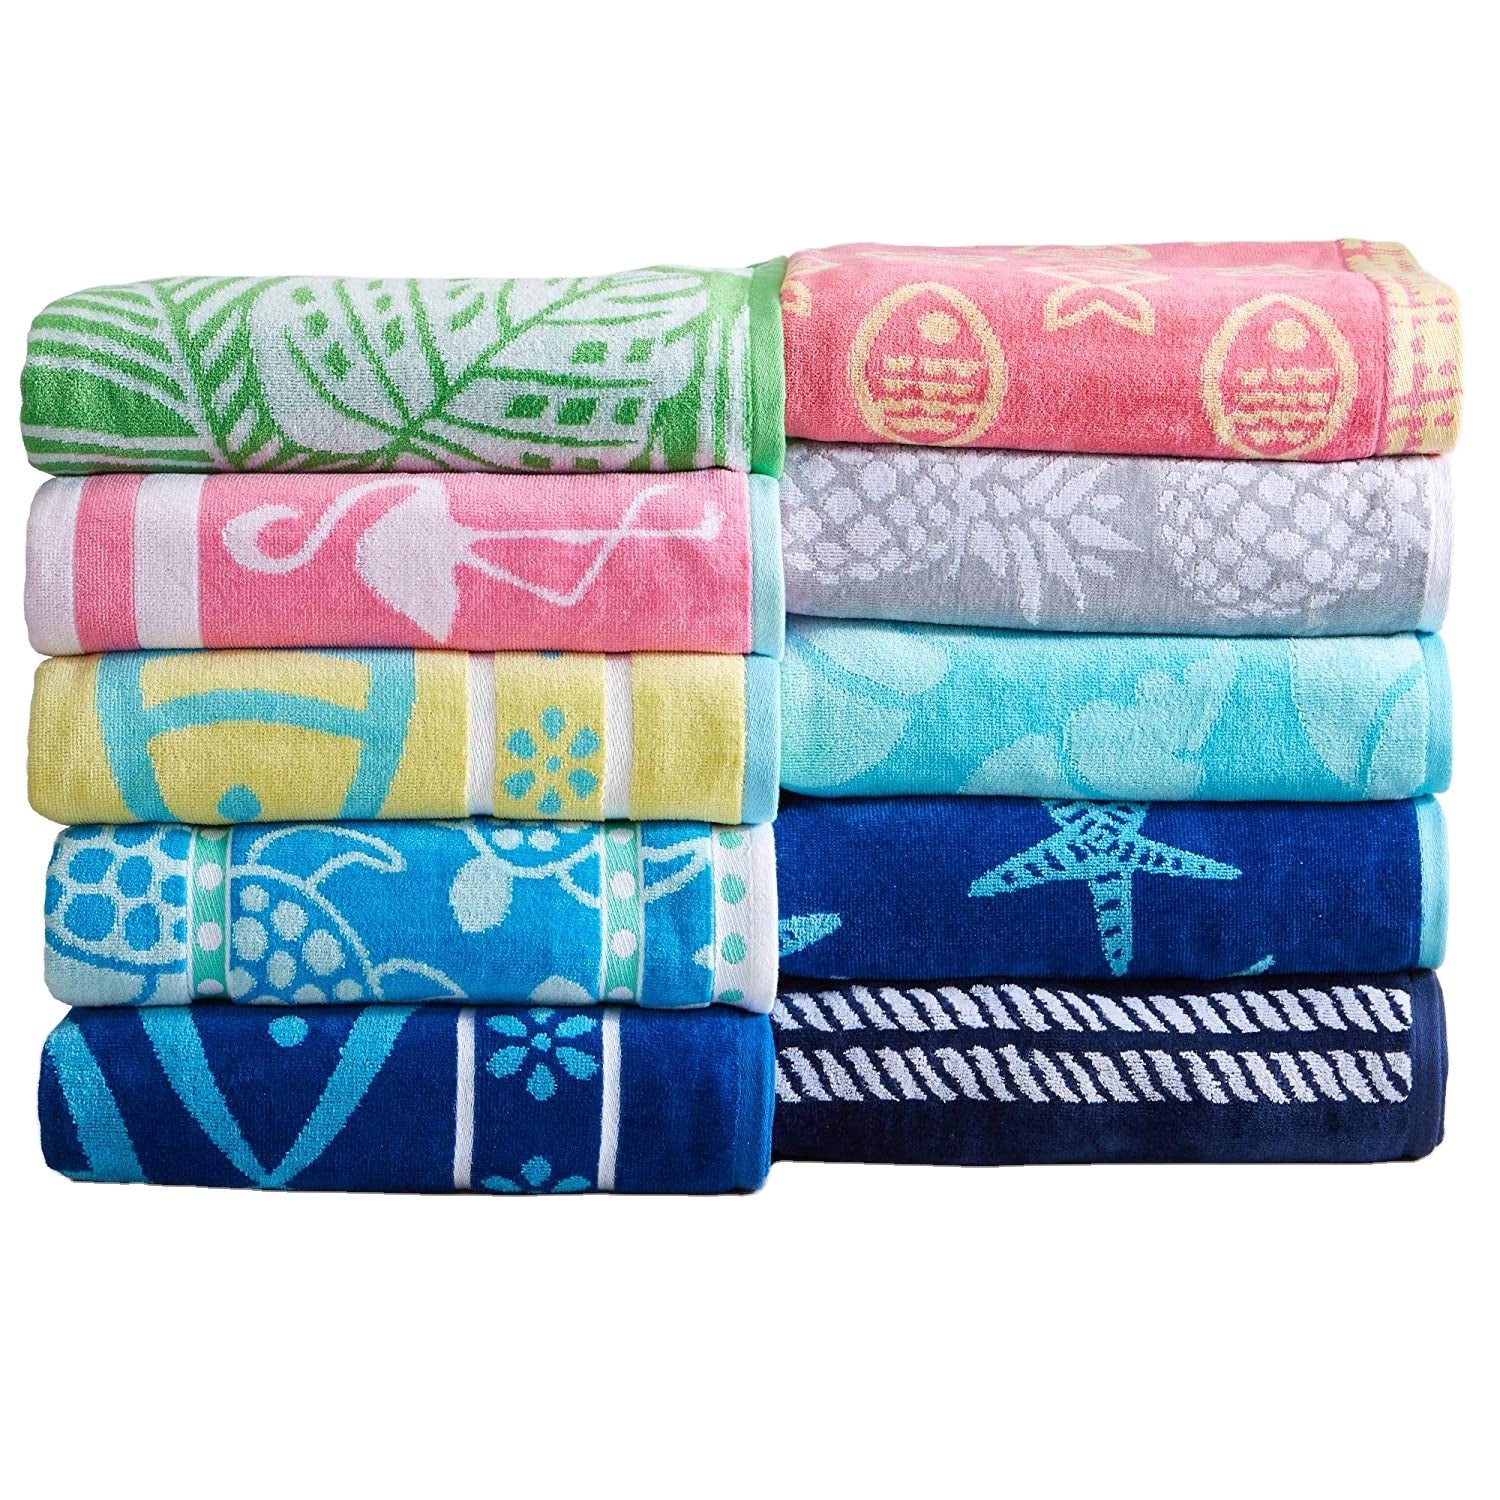 Cotton Tea Towels - Assorted Designs - CAPERS Home